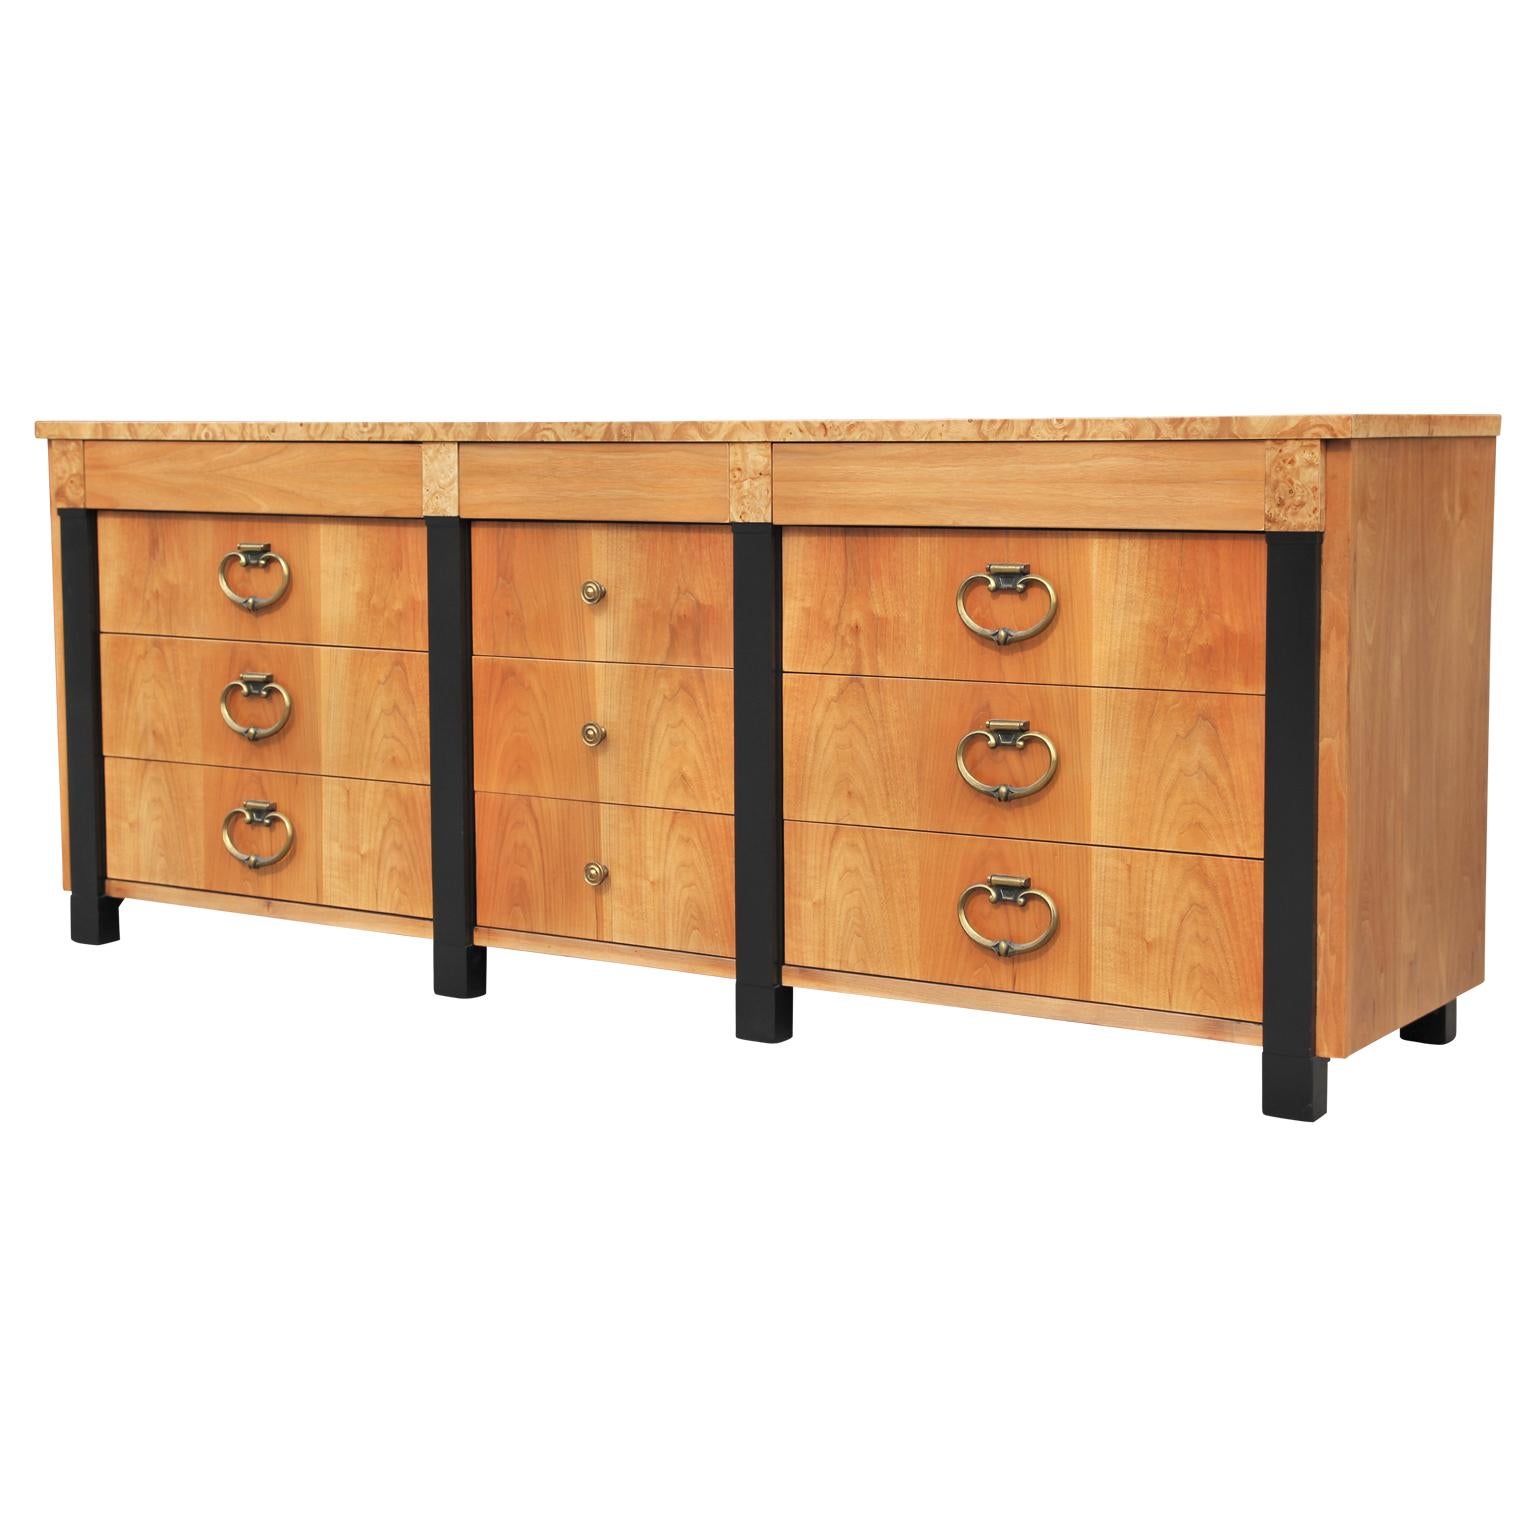 Modern 9 drawer dresser with burl trim and black columns Hollywood Regency. Classical design but with a modern finish.